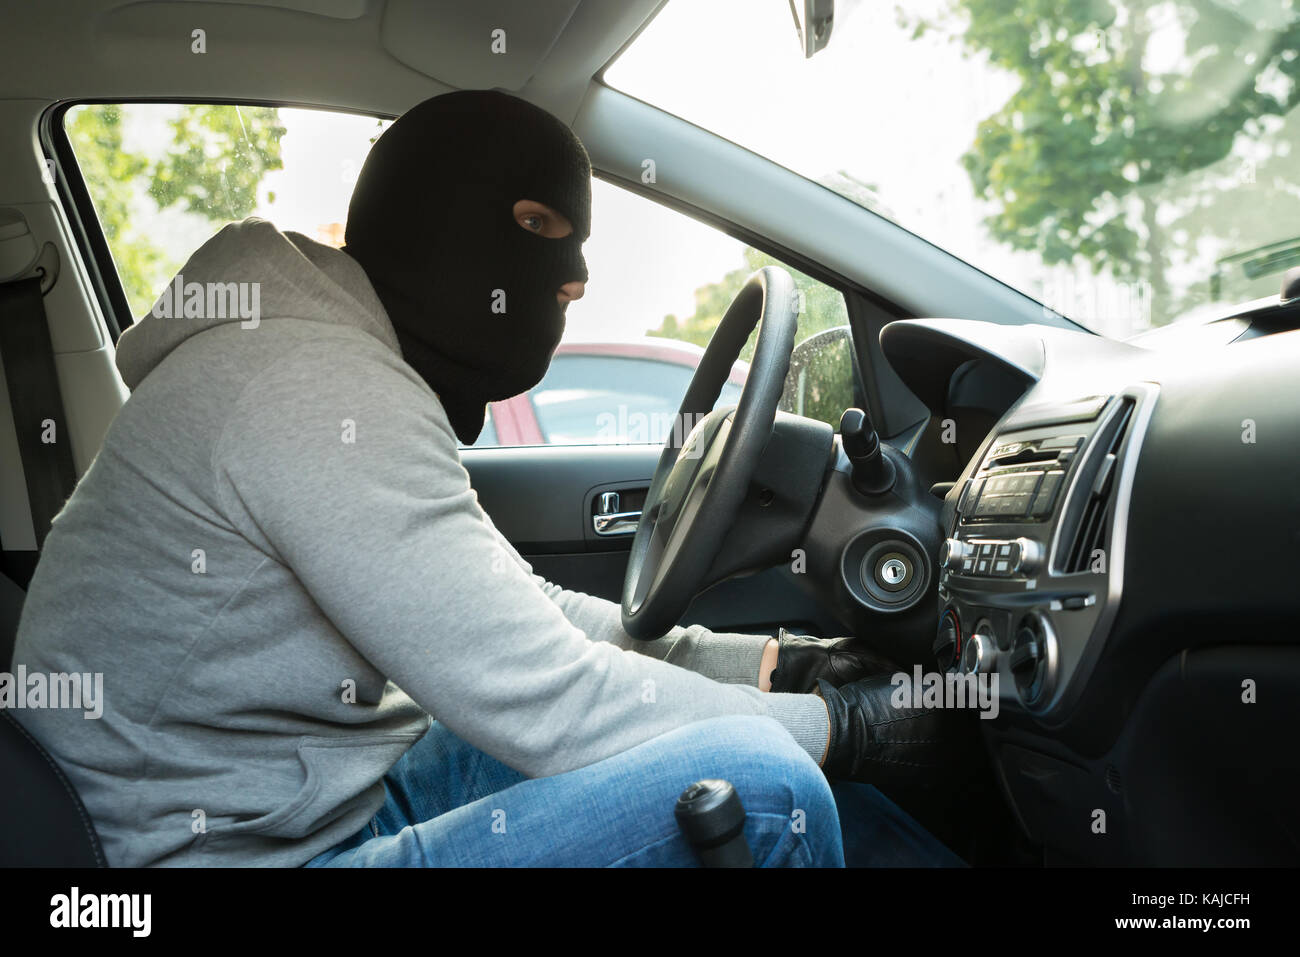 Thief With Mask Trying To Steal A Car Stock Photo